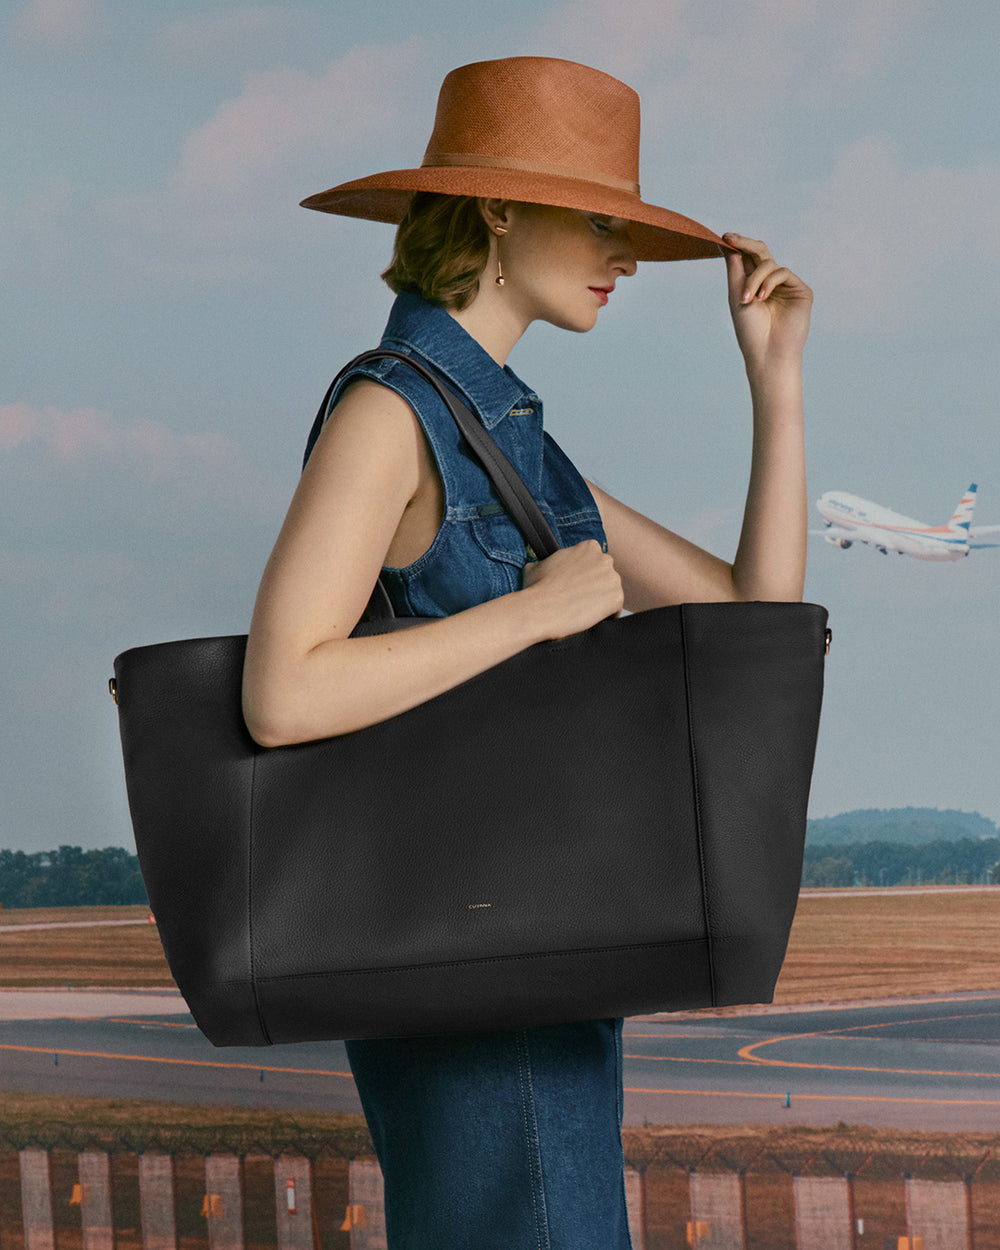 Person in a sleeveless outfit holding a large tote bag with a hat on, plane in the background.